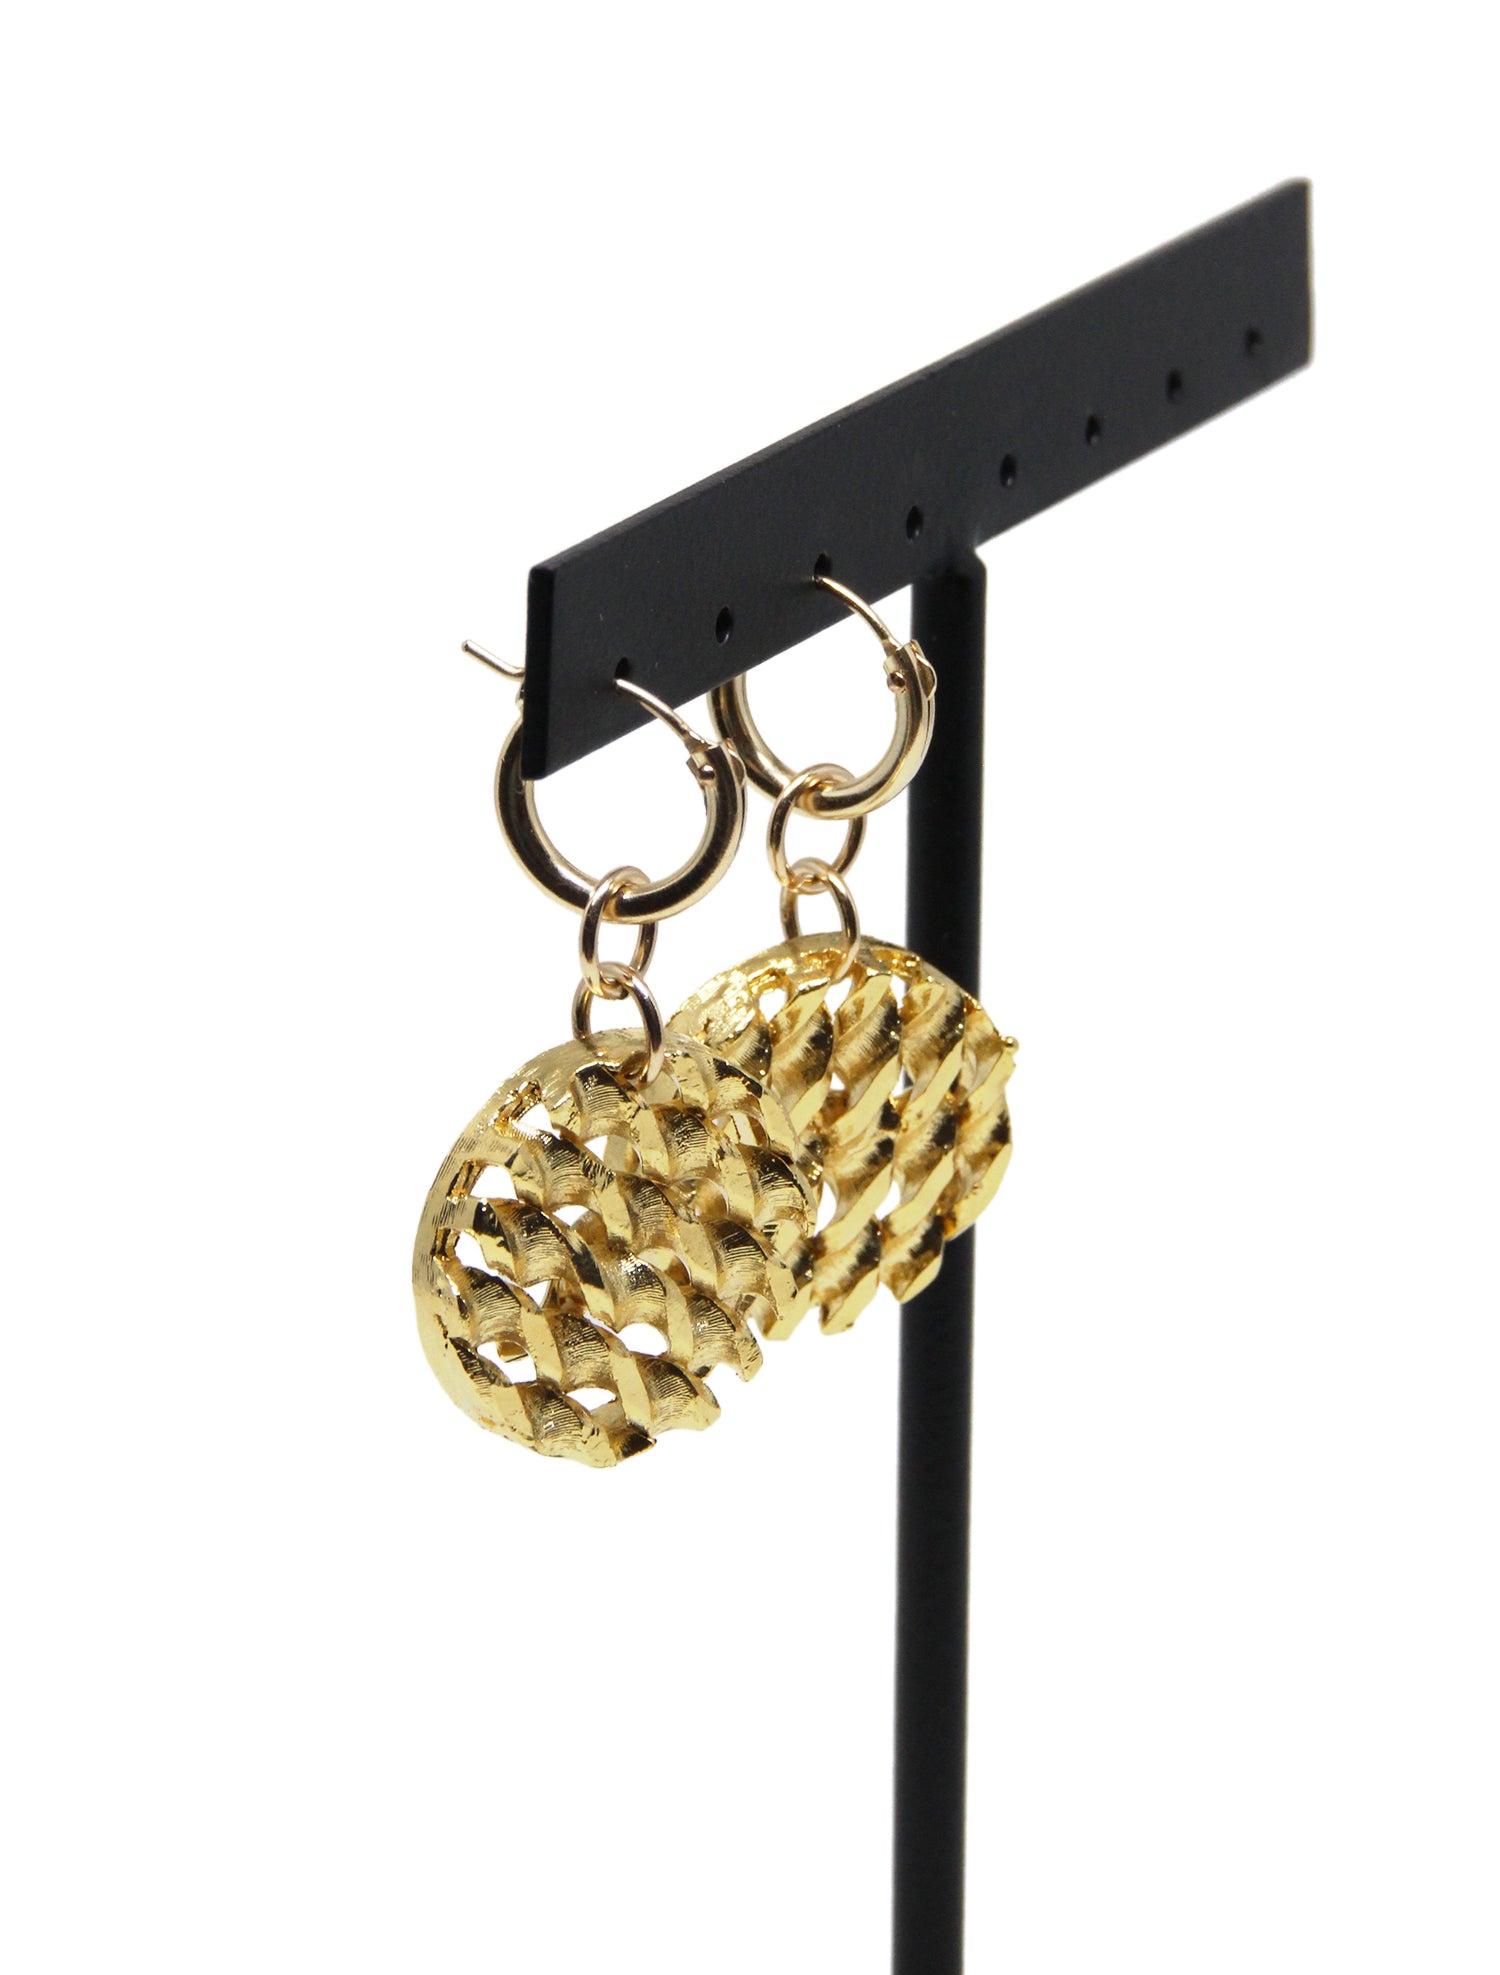 llayers bijoux upcyclés boucles d'oreilles texturées or - vintage upcycling textured hoop gold earrings